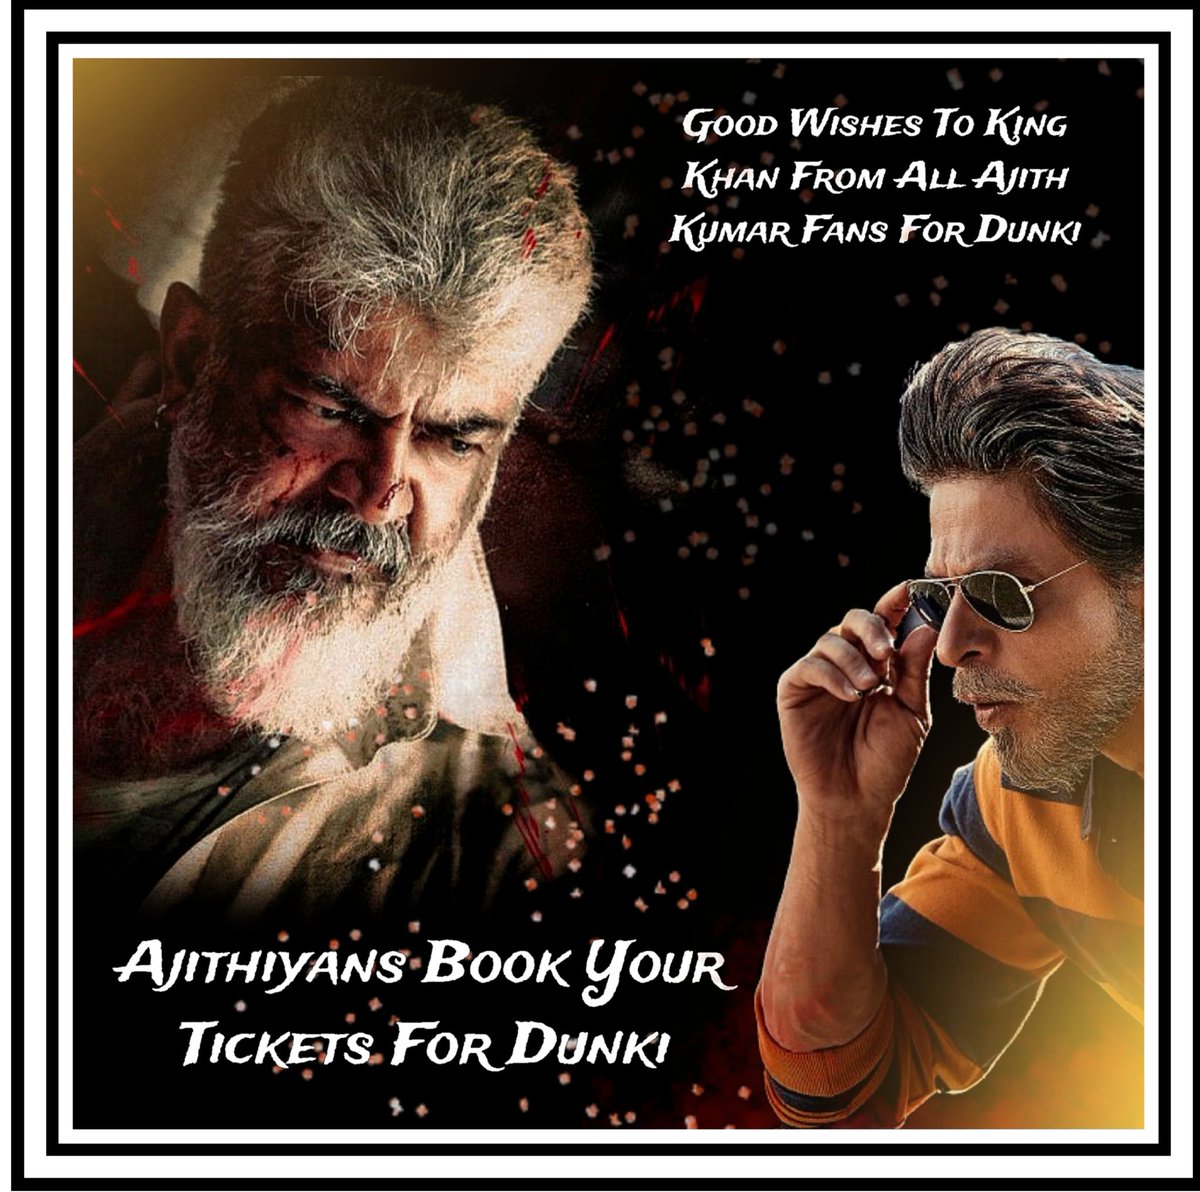 My Dear Ajithiyans 

Book your tickets for #Dunki asap with your friends , families watch our King Khan on big screen only 

FULL SUPPORT FROM ALL THE TAMIL NADU AJITH KUMAR FANS 🔥

#Dunki #ShahRukhKhan #DunkiAdvanceBooking #DunkiFDFS #DunkiFirstDayFirstShow 

#VidaaMuyarchi